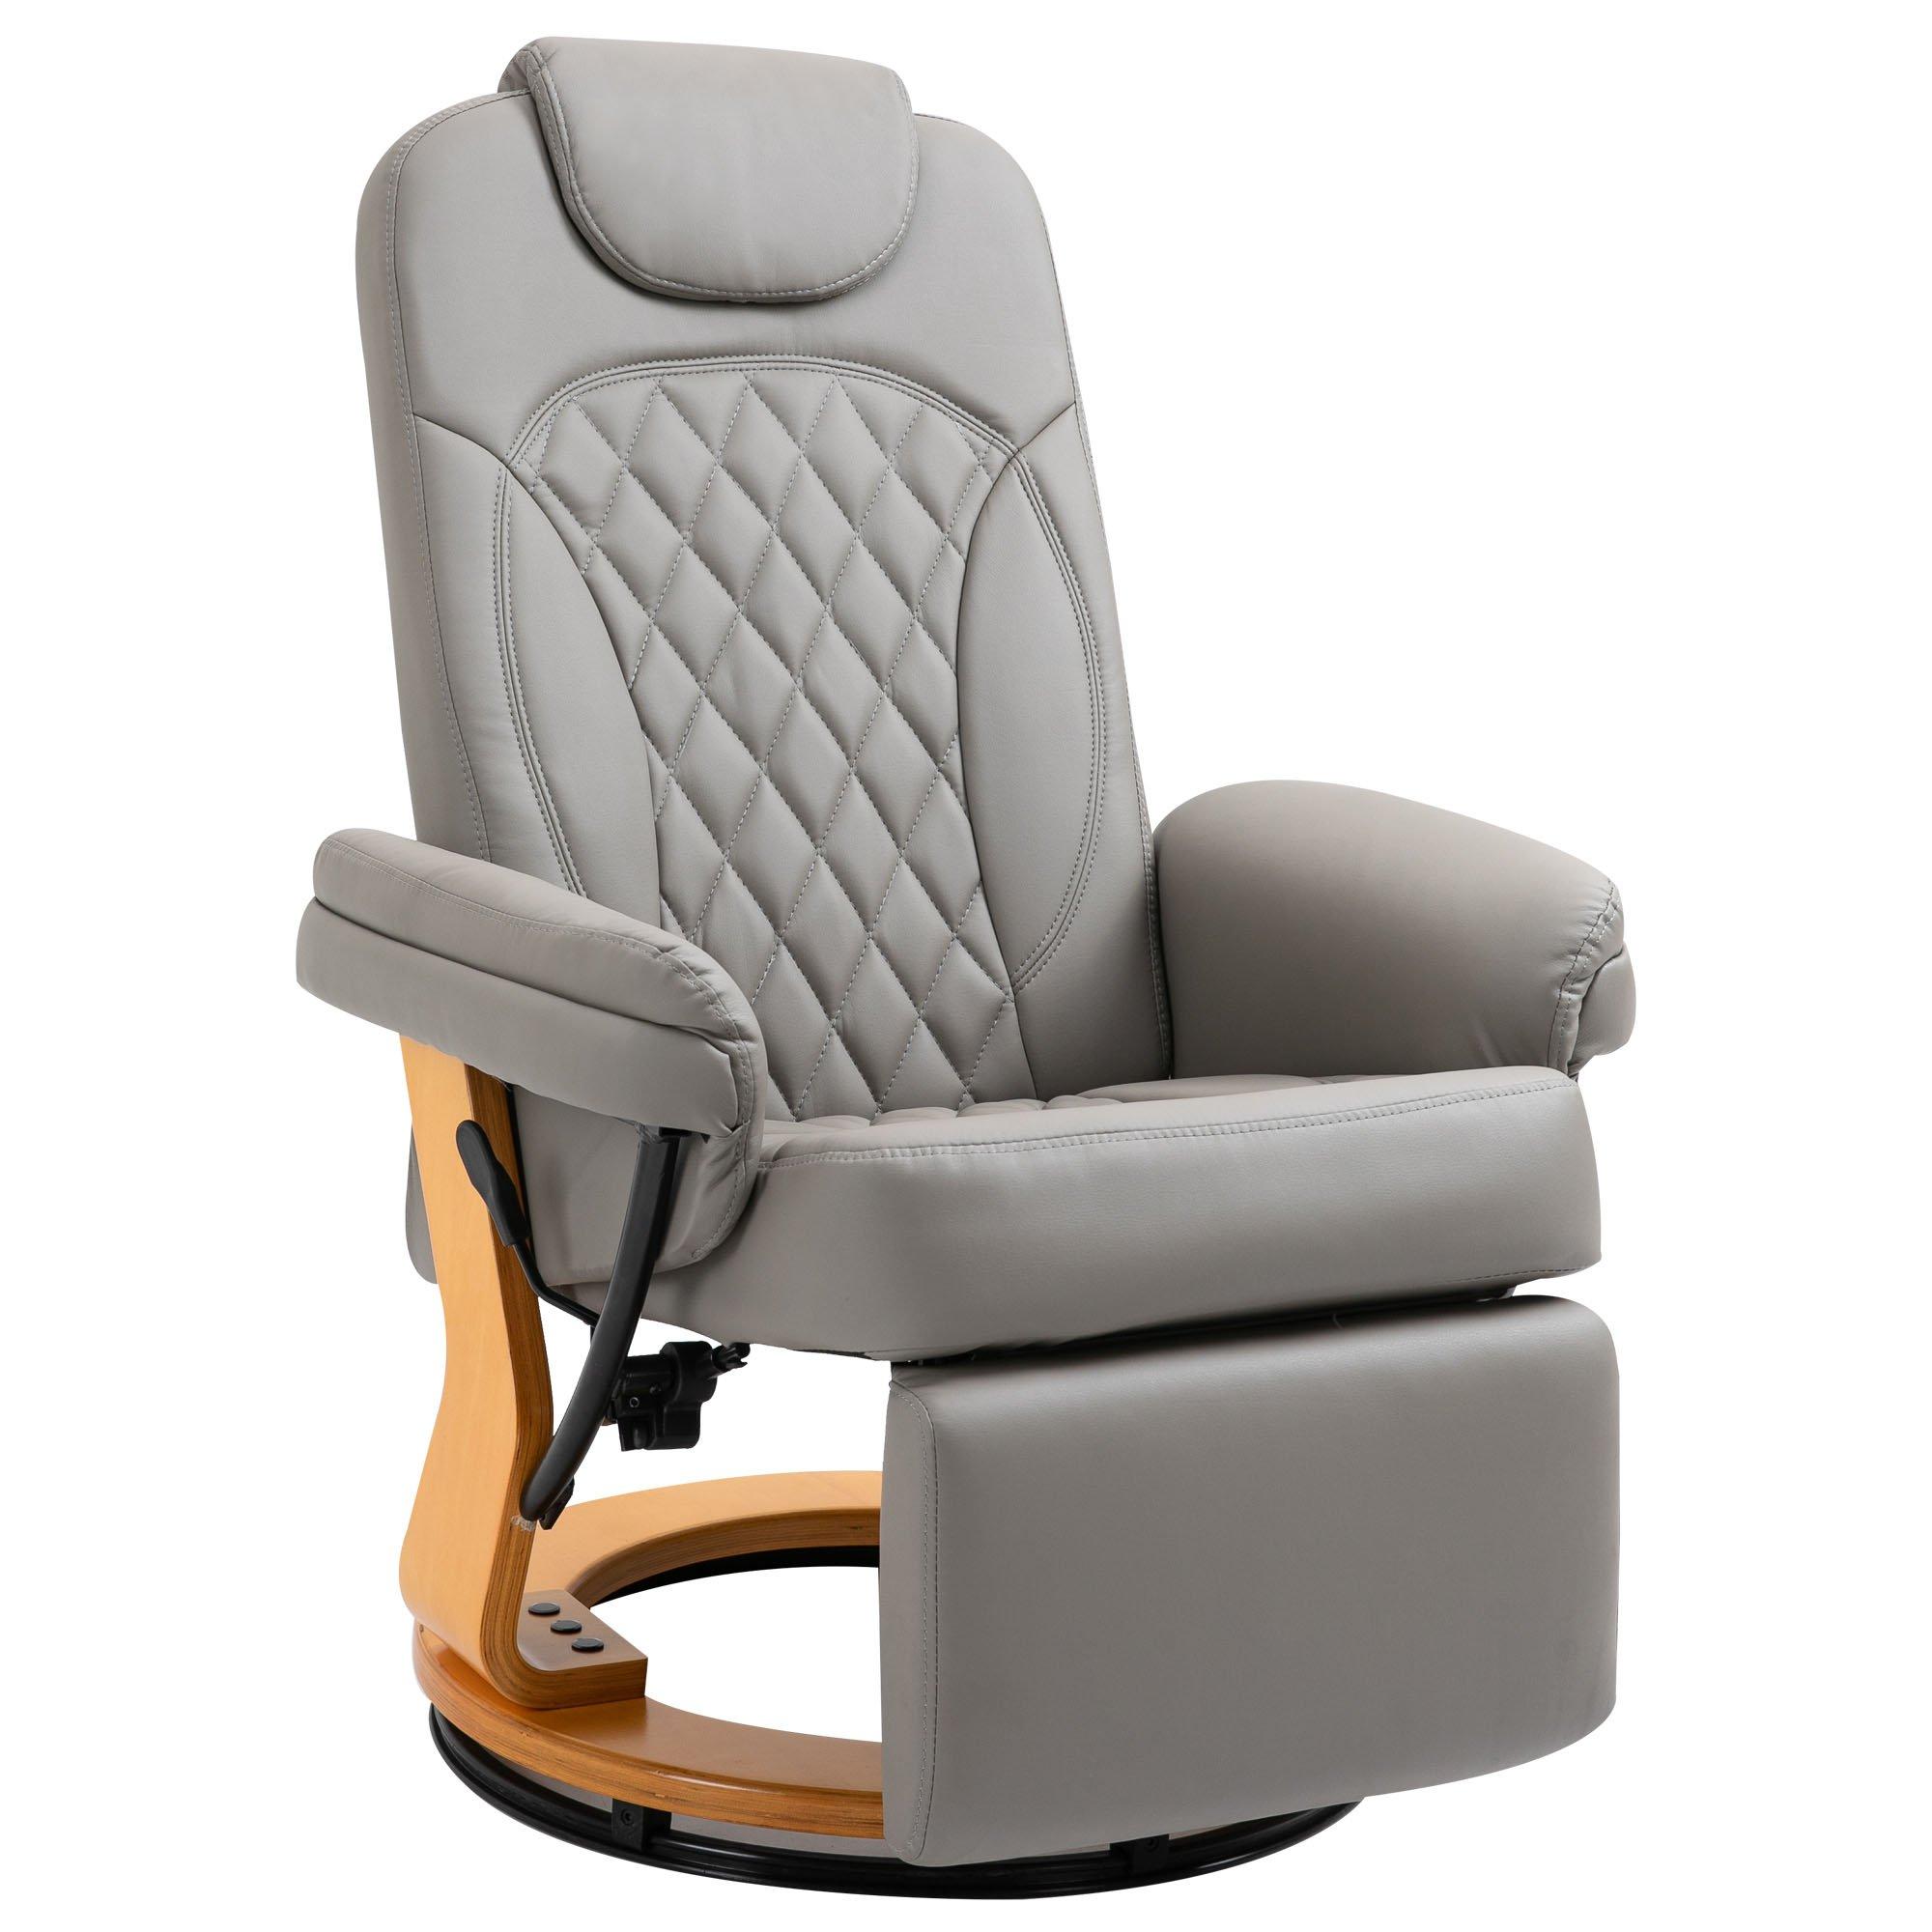 PU Recliner Lounge Chair with Footrest Headrest Wood Base for Home